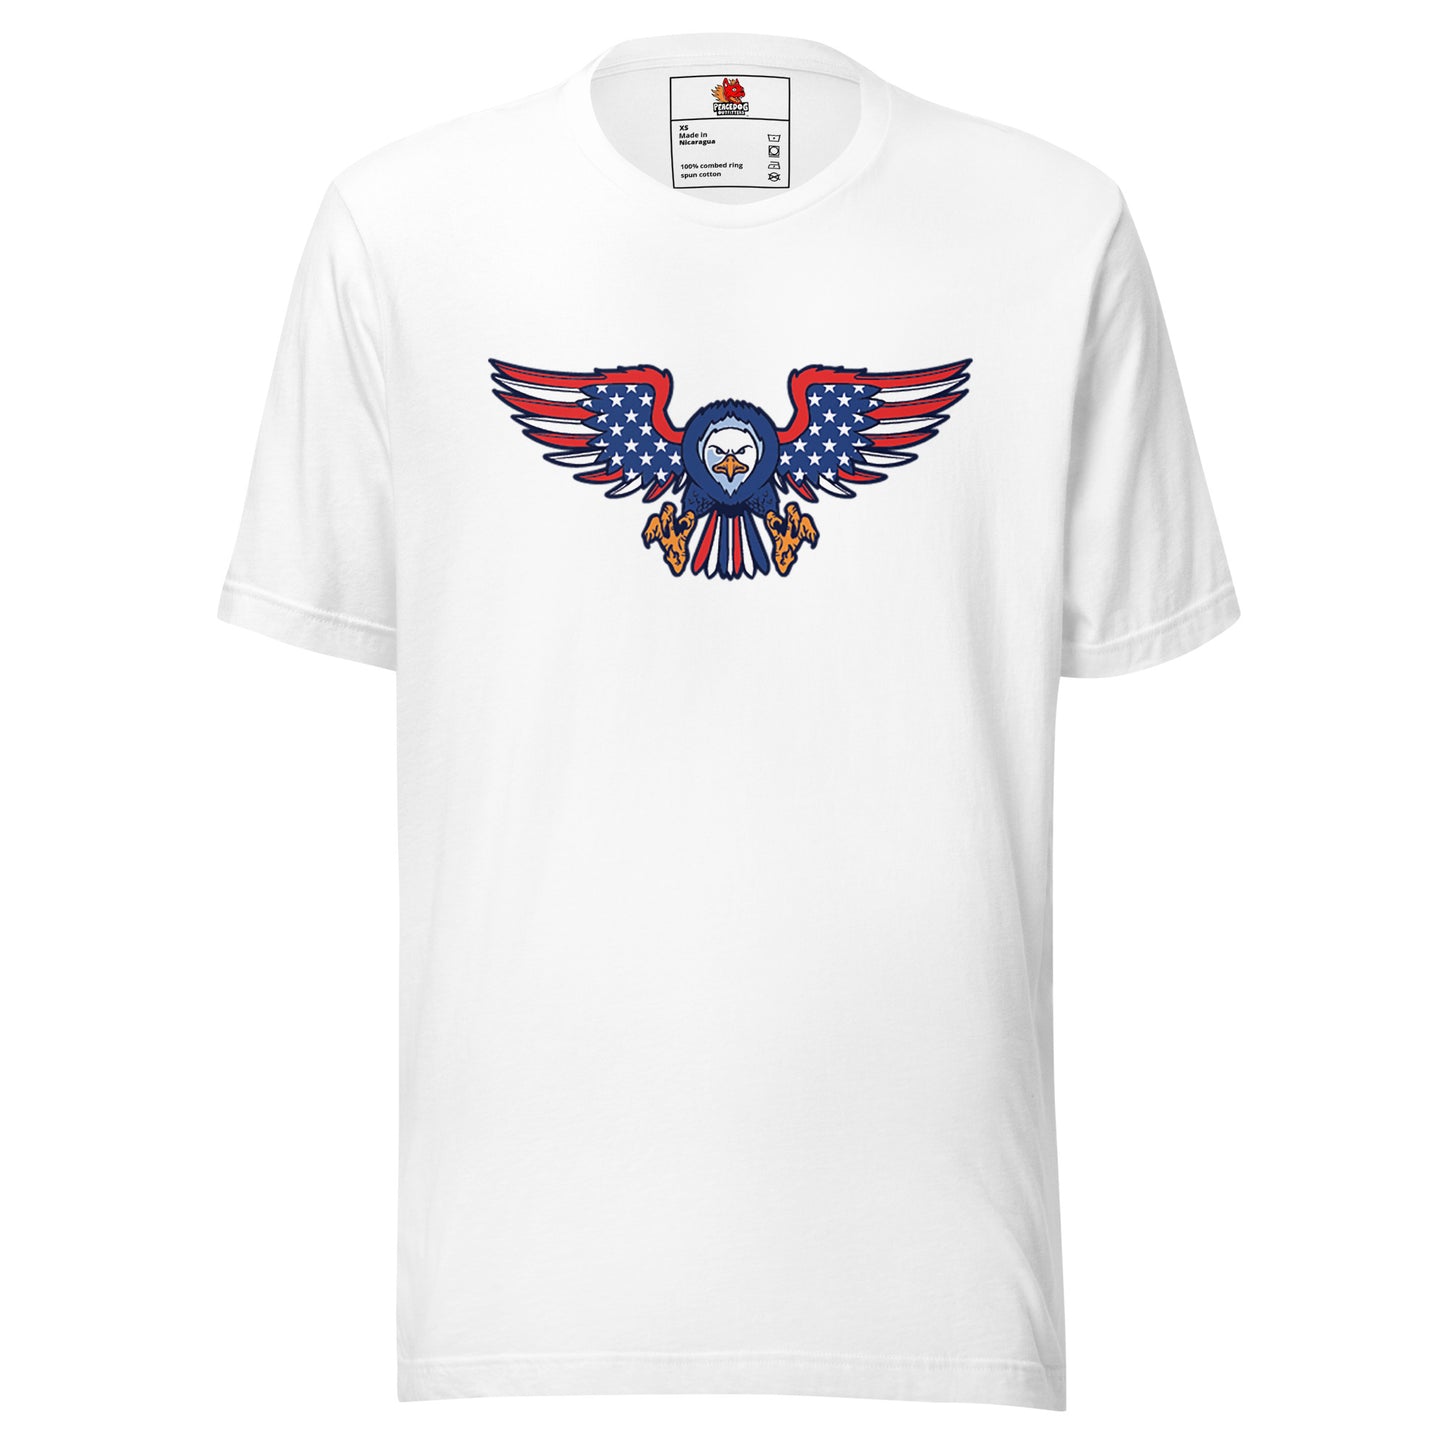 Eagle outstretched T-shirt